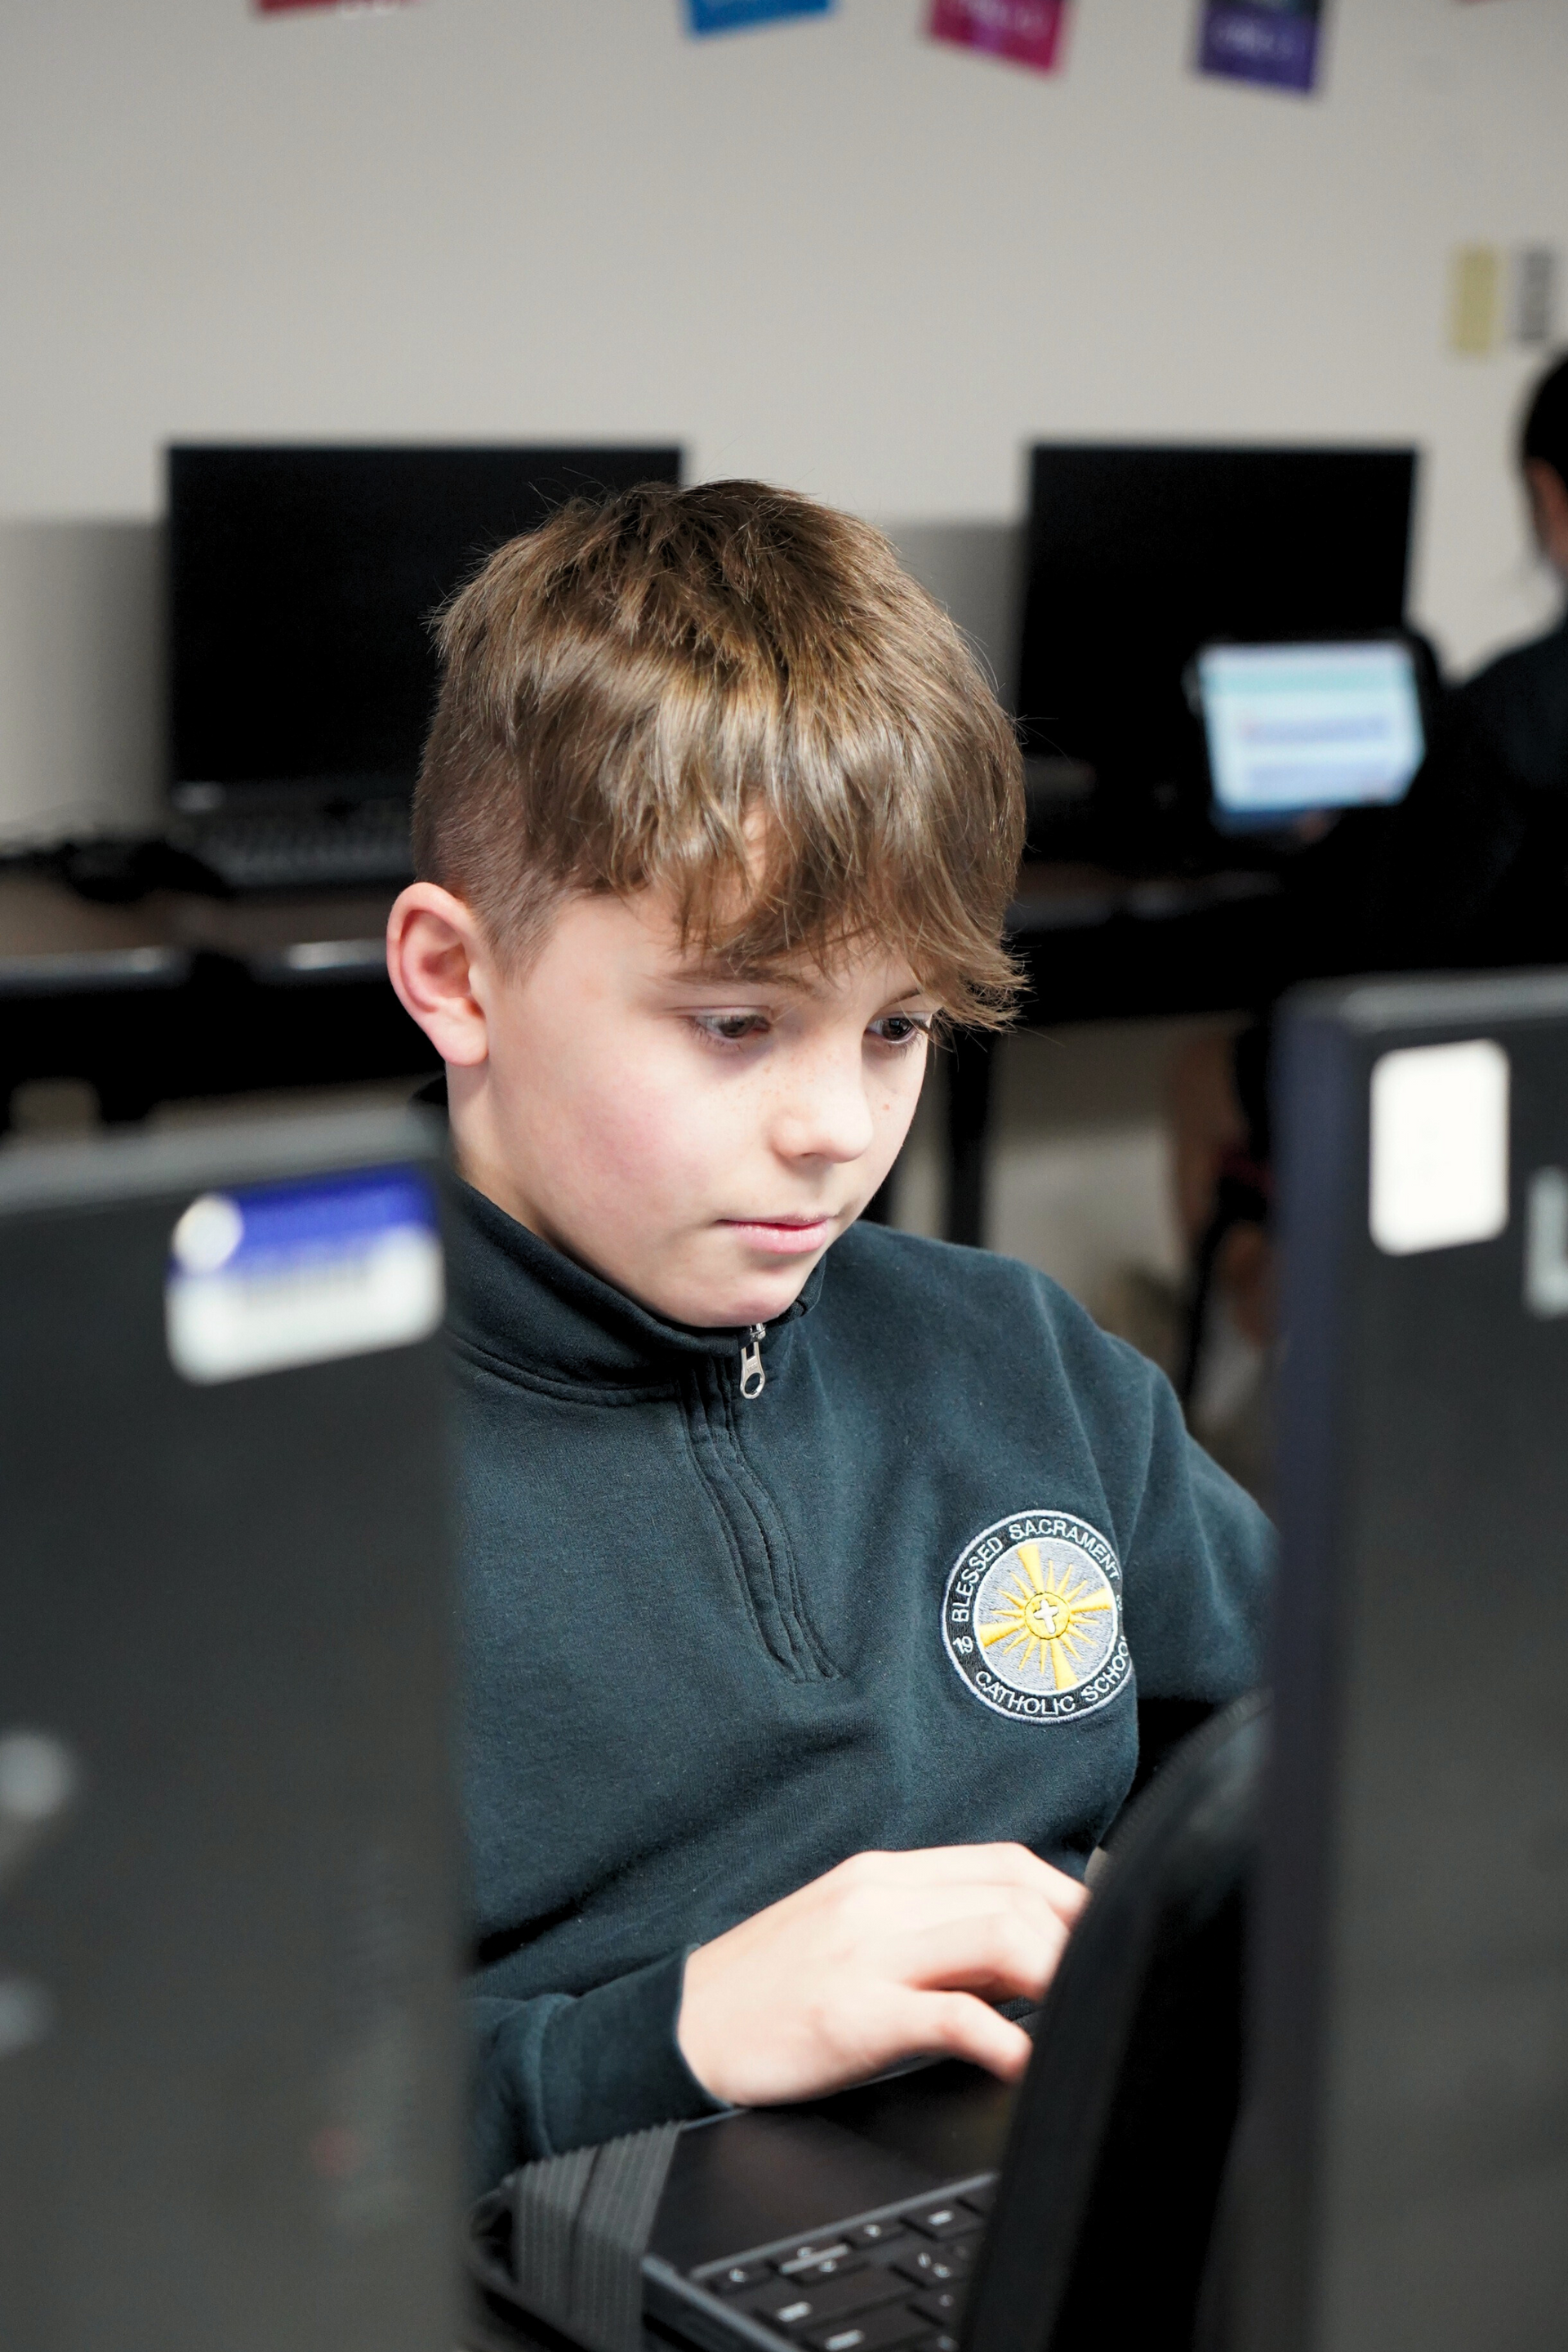 A young boy is using a laptop computer in a classroom.